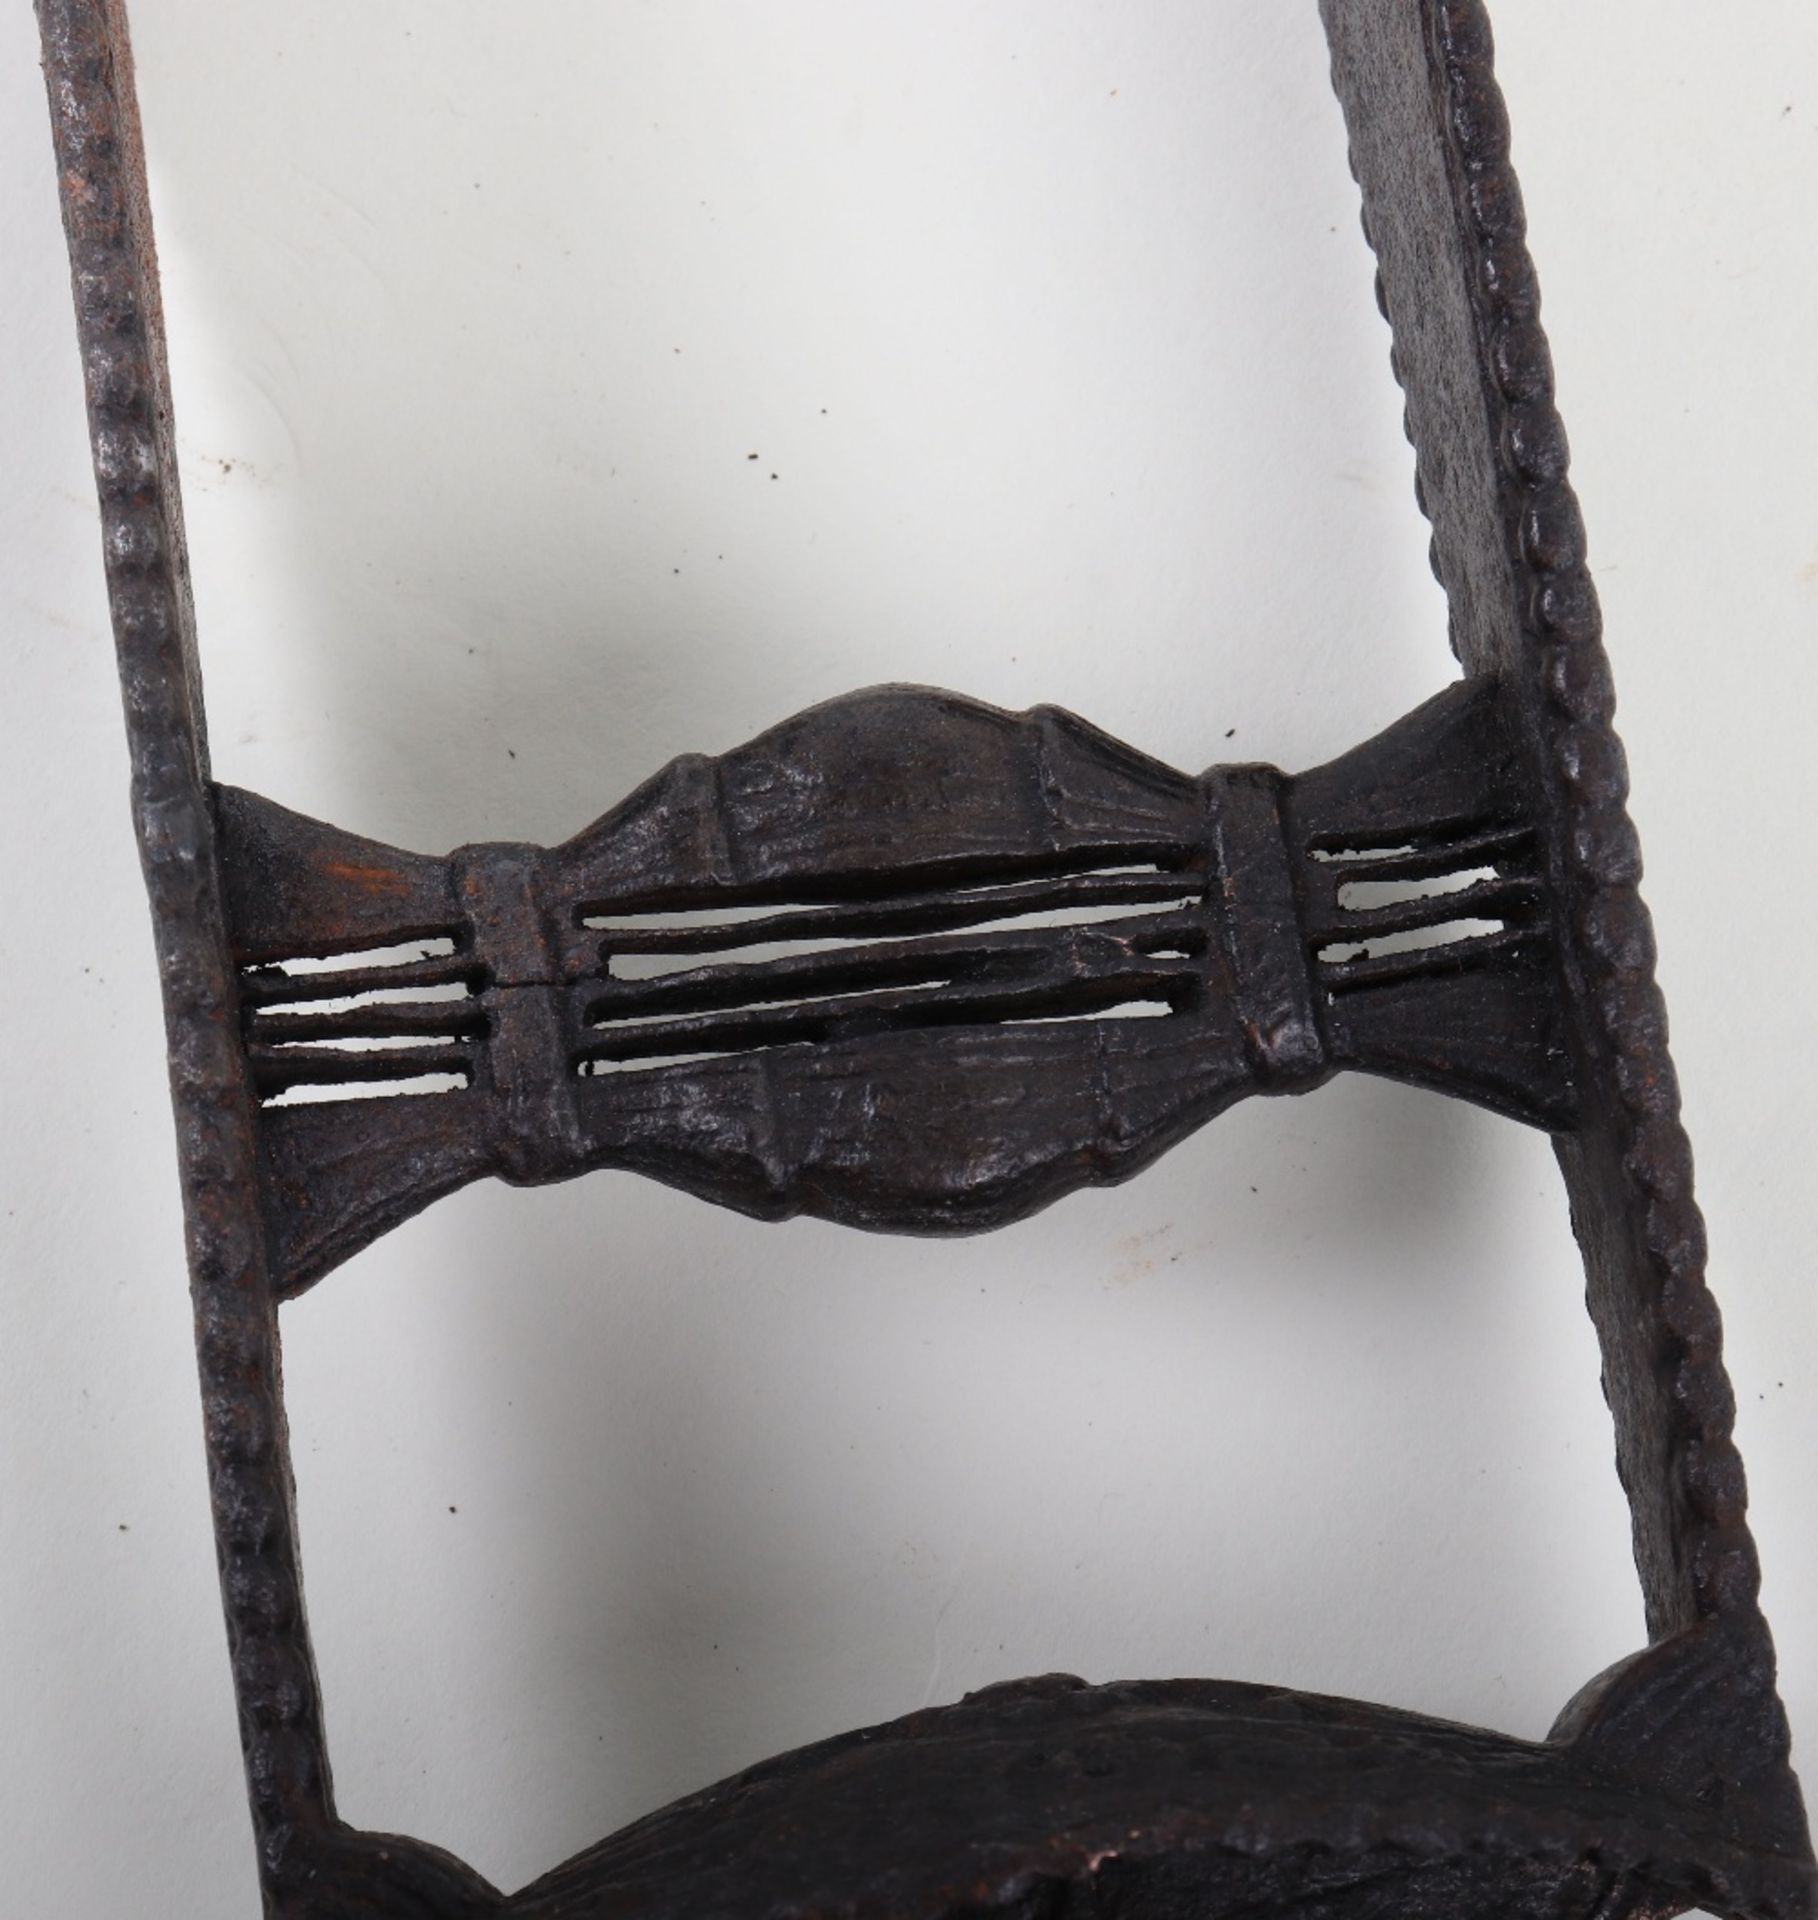 Indian Iron Katar of Tanjore Armoury Type, 17th Century - Image 7 of 10